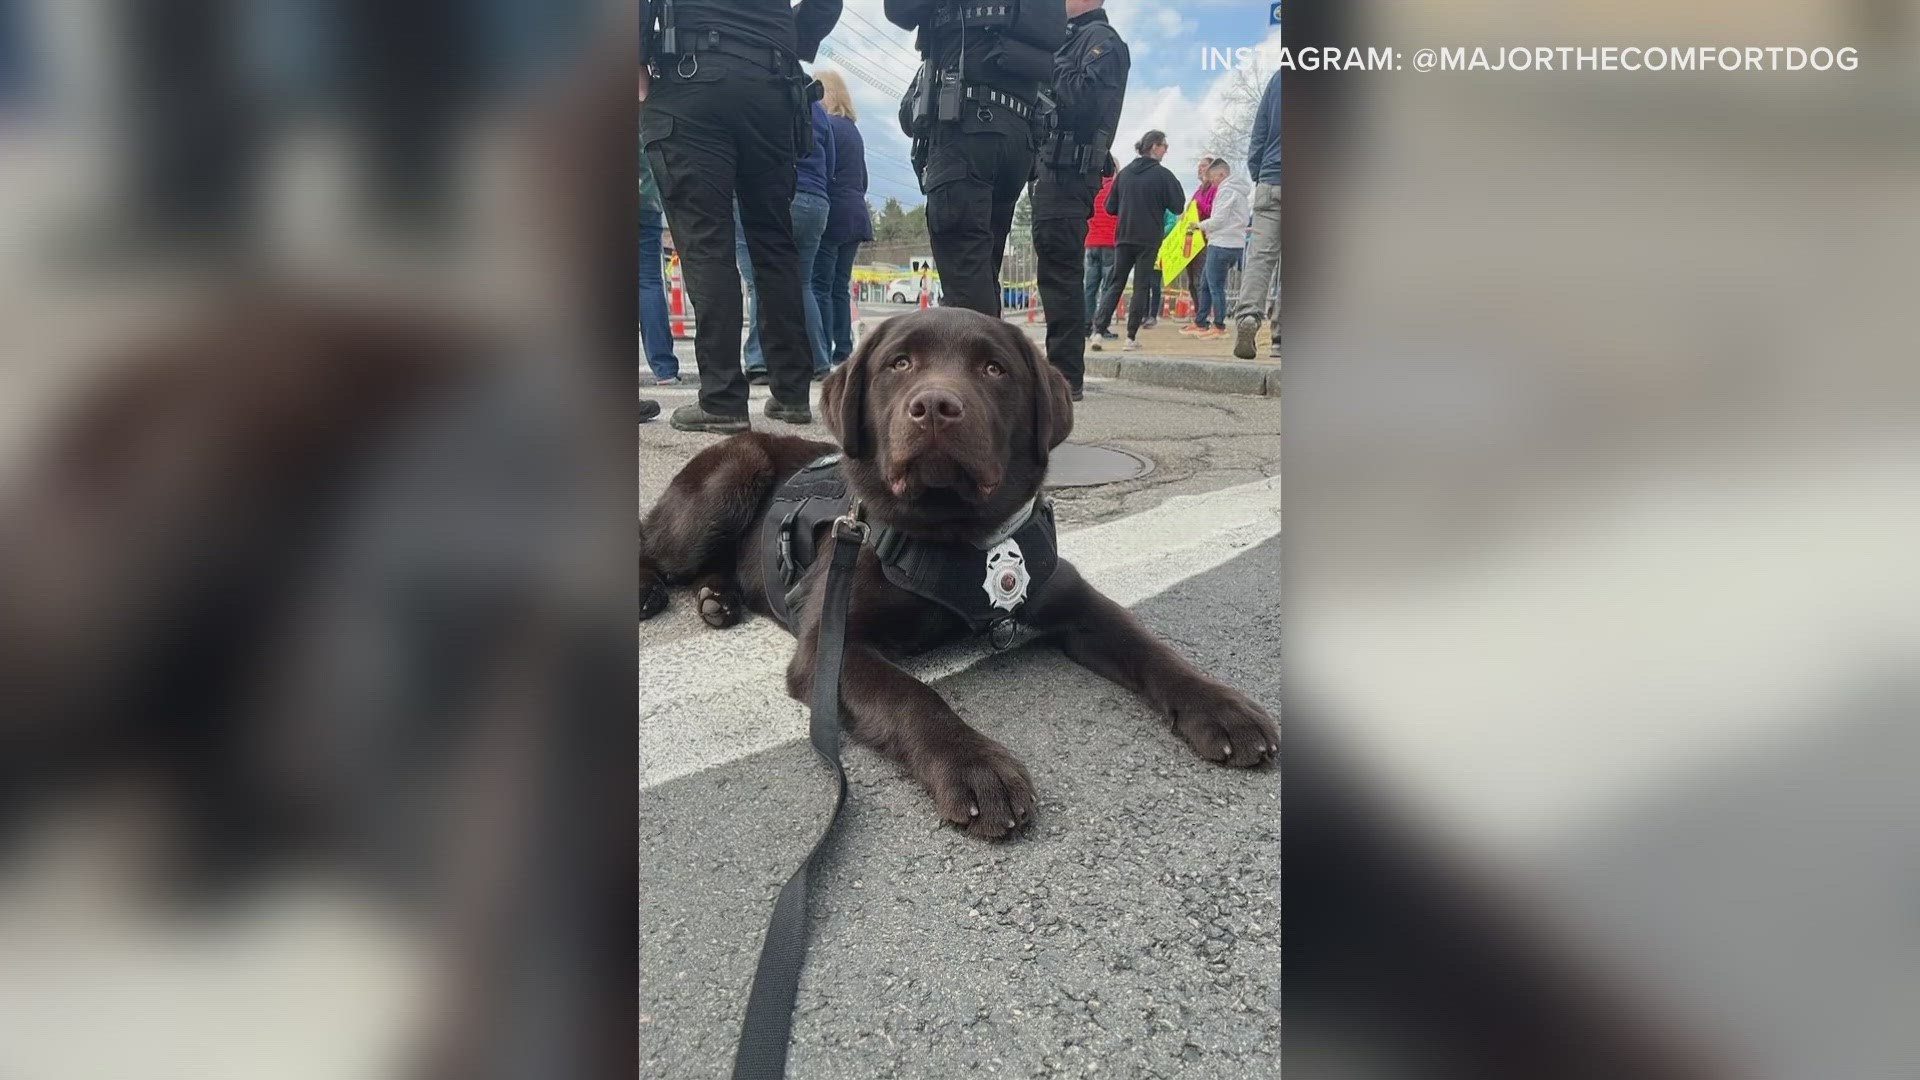 The 7-month-old chocolate Lab and his partner, Officer Mike Taddei, were at the 5-kilometer mark of the race in Ashland, Massachusetts.